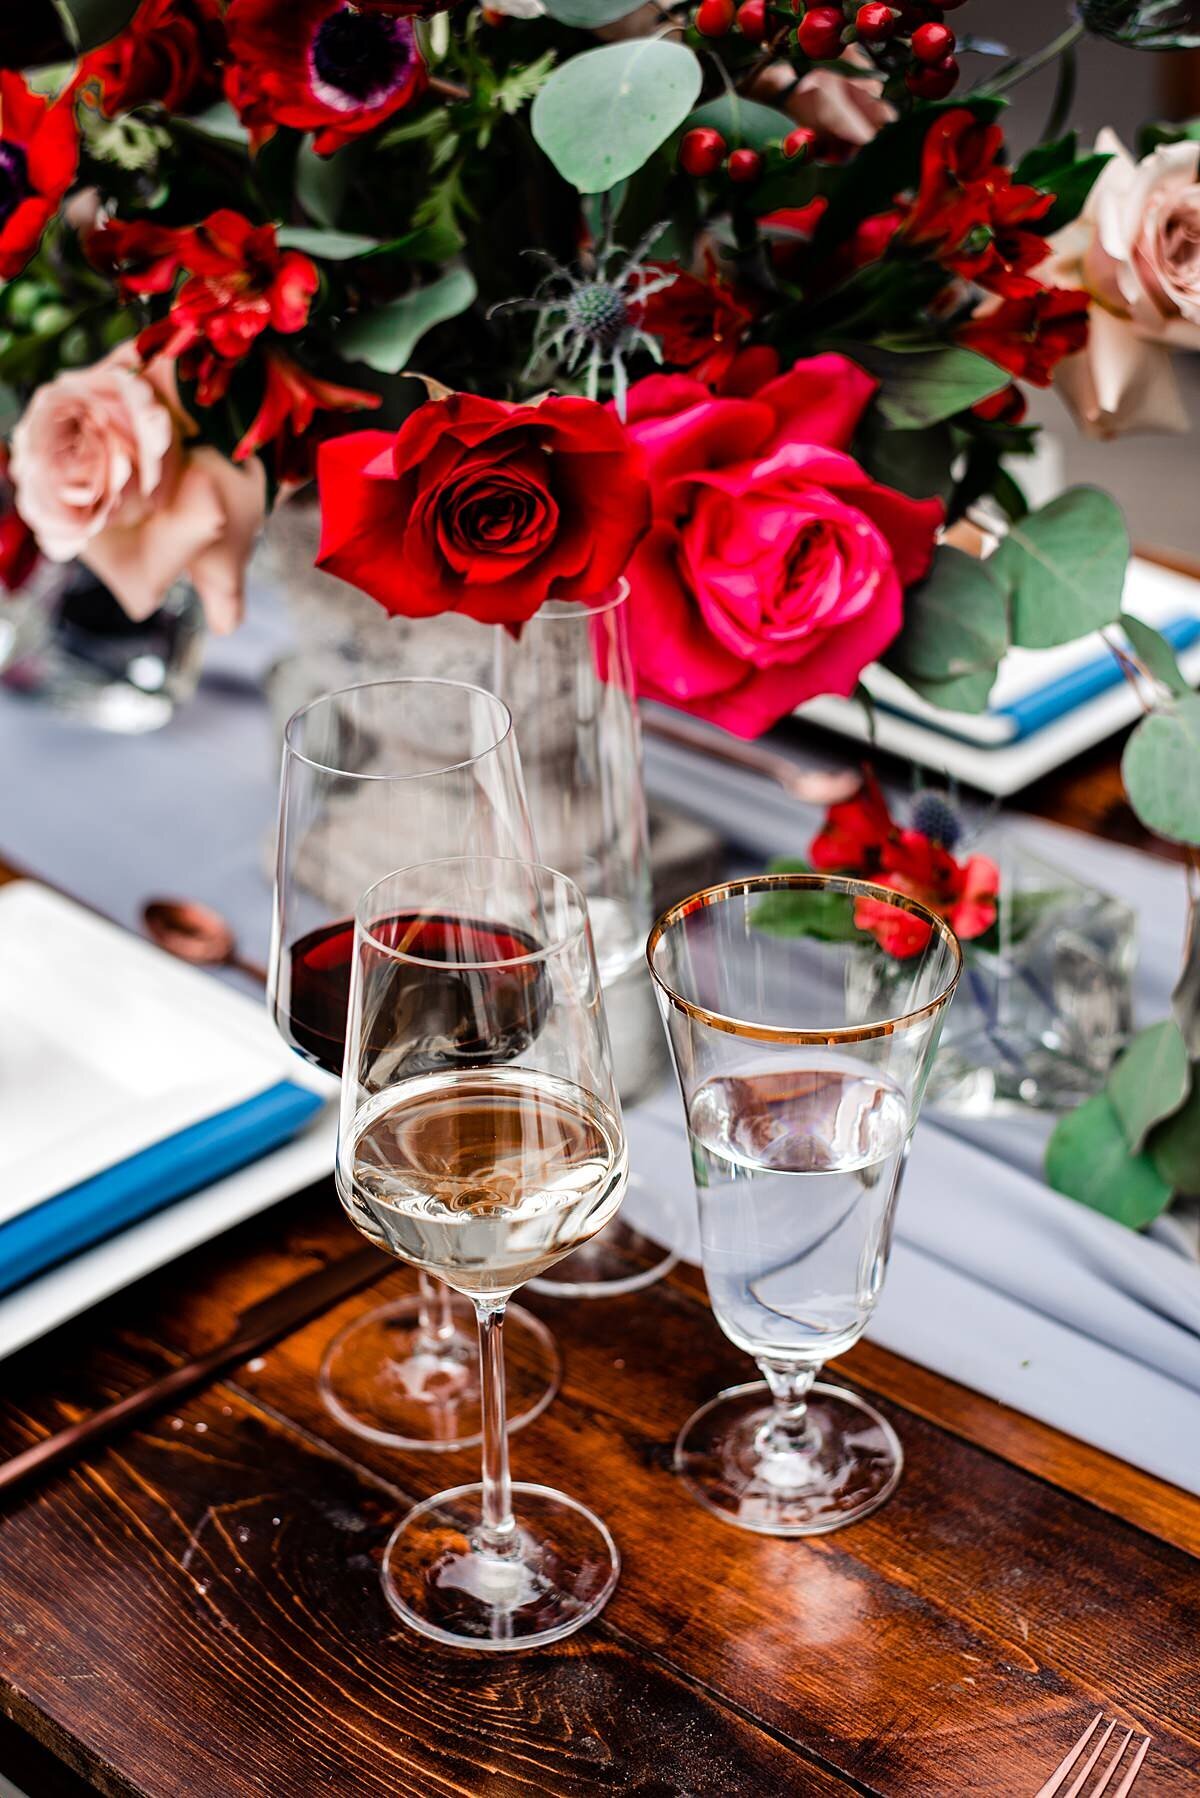 A farm table set with square white plates and a teal linen napkin, a dove gray sheer organza table runner, a large centerpiece of red roses, blush roses, red hypericum berries and blue thistle. There is a large tulip shaped stemmed red wine glass, a smaller stemmed tulip shaped white wine glass and a footed crystal water goblet with a gold rim on the table at Arrington Vineyards.